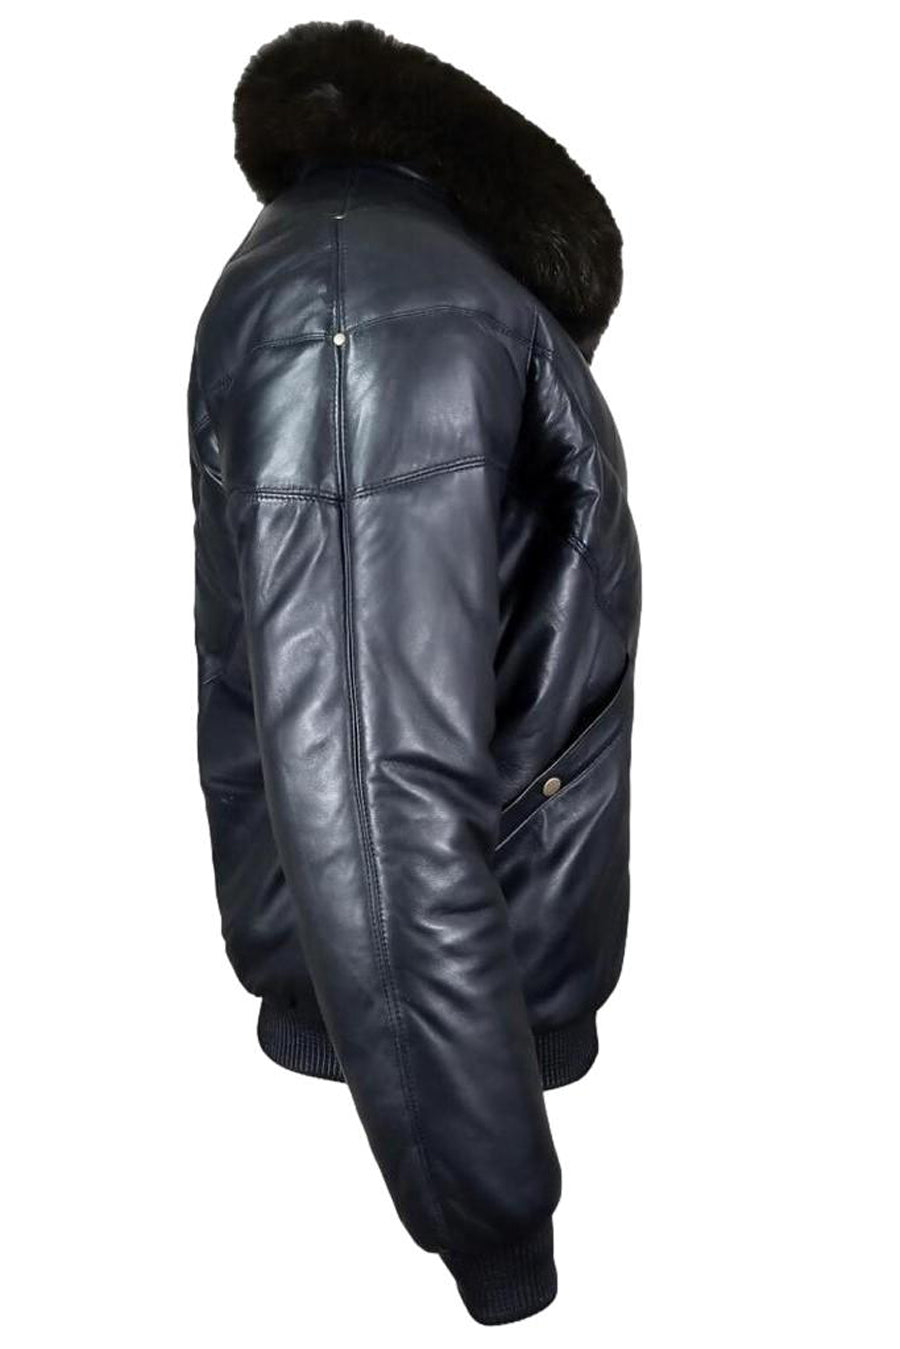 Picture of the side of our Mens Black Leather Bomber Jacket with Fur Collar.